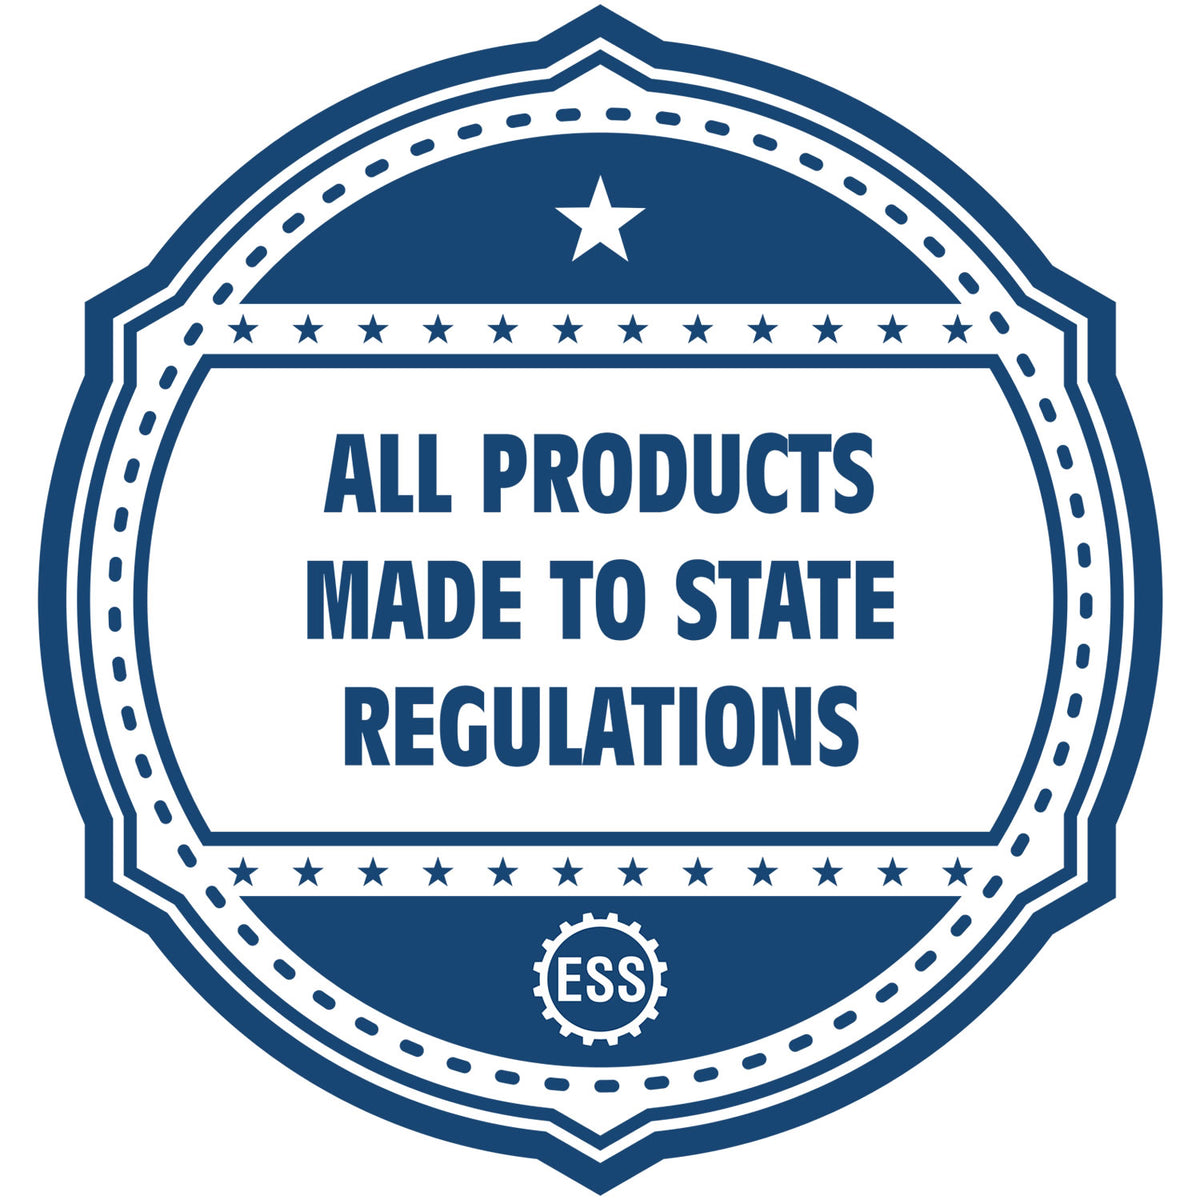 An icon or badge element for the Long Reach South Carolina PE Seal showing that this product is made in compliance with state regulations.